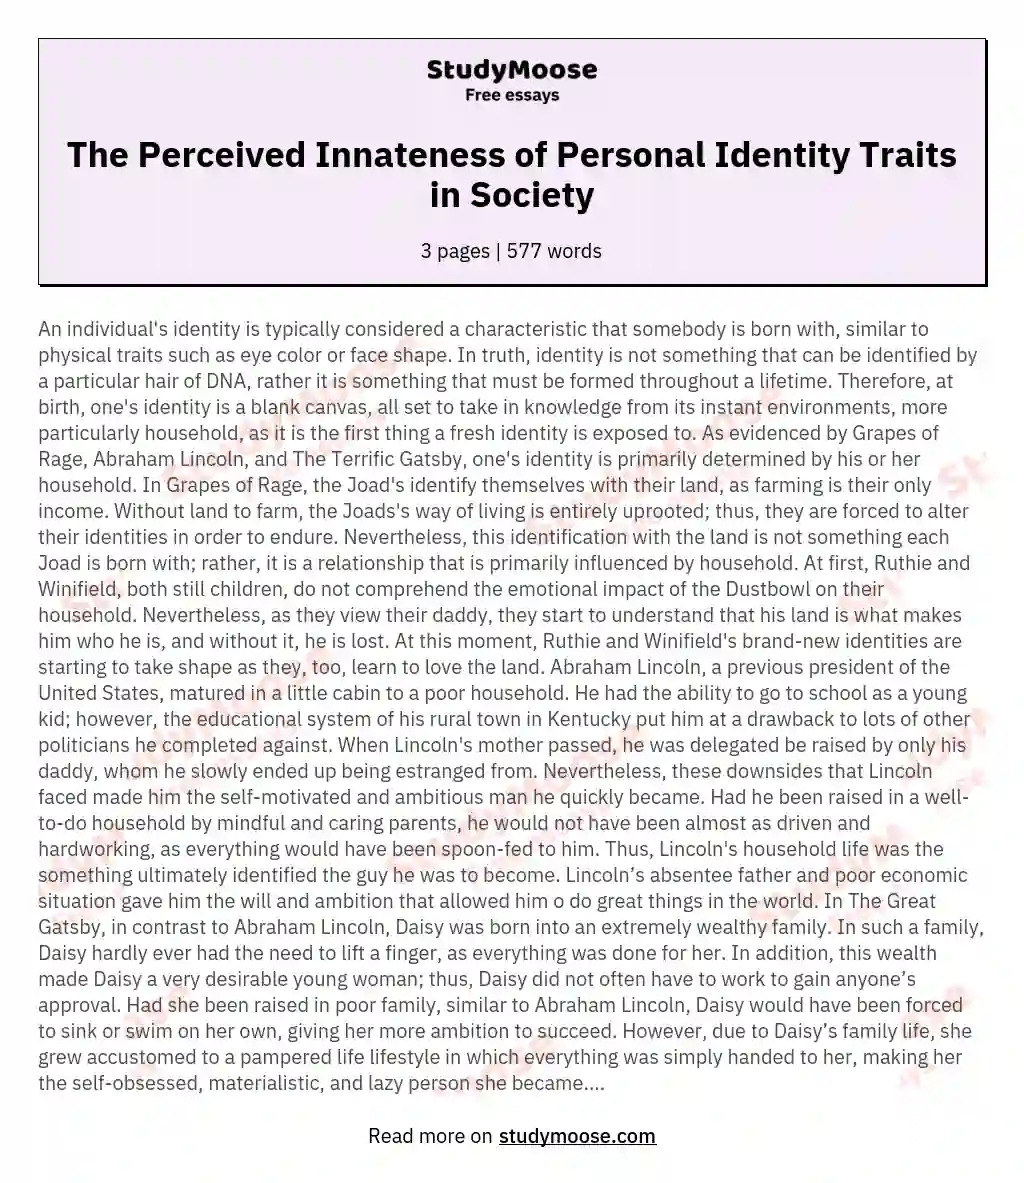 The Perceived Innateness of Personal Identity Traits in Society essay